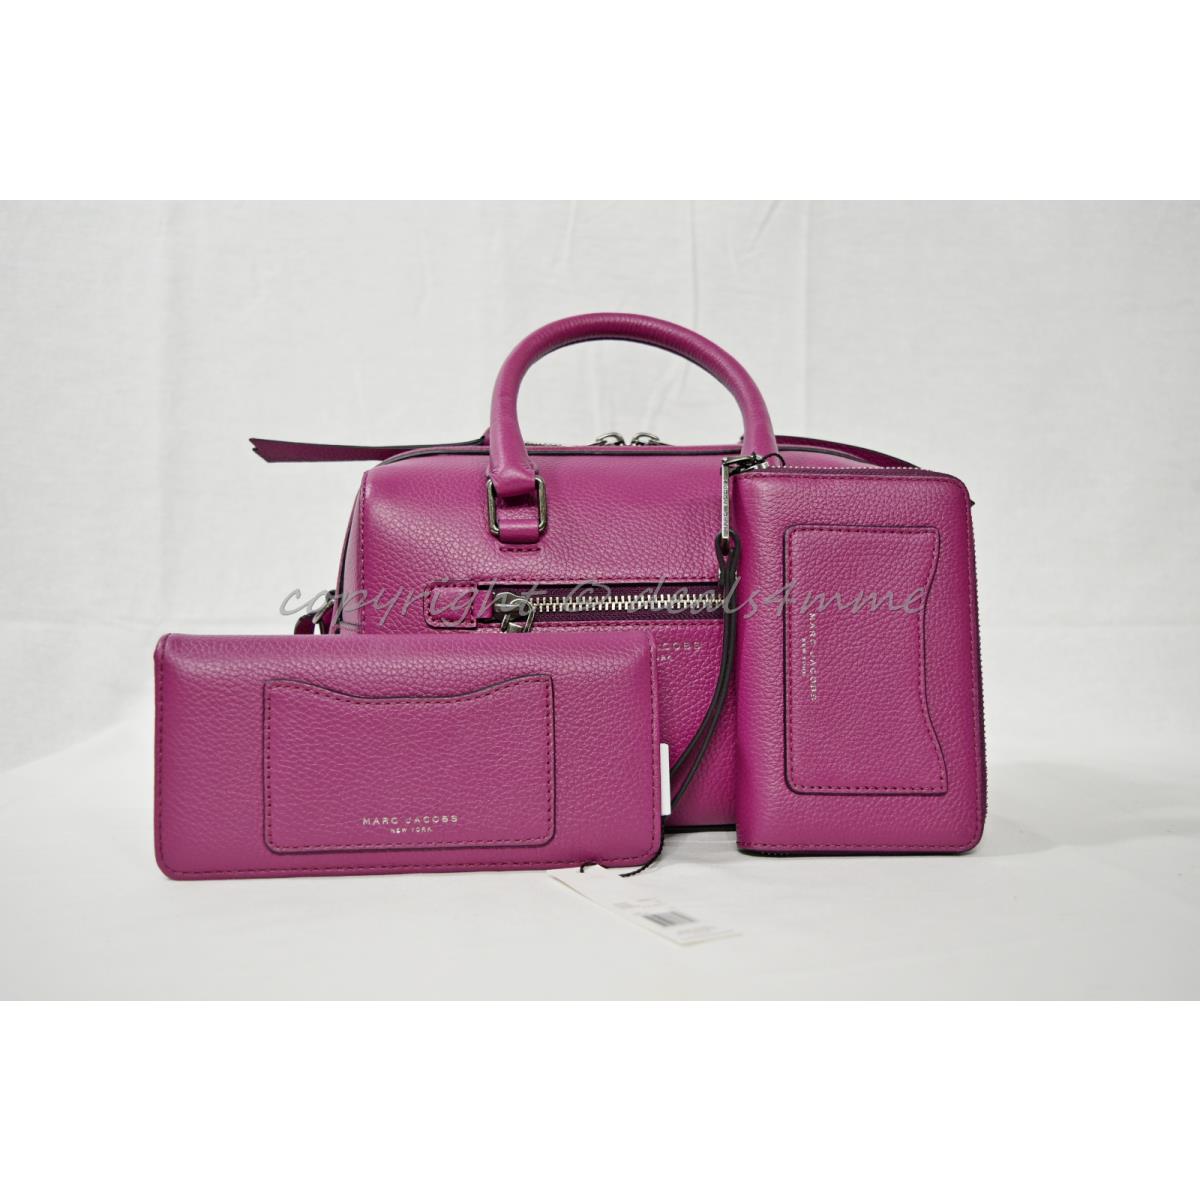 Marc By Marc Jacobs Recruit Small Bauletto Satchel Wallets in Wild Berry